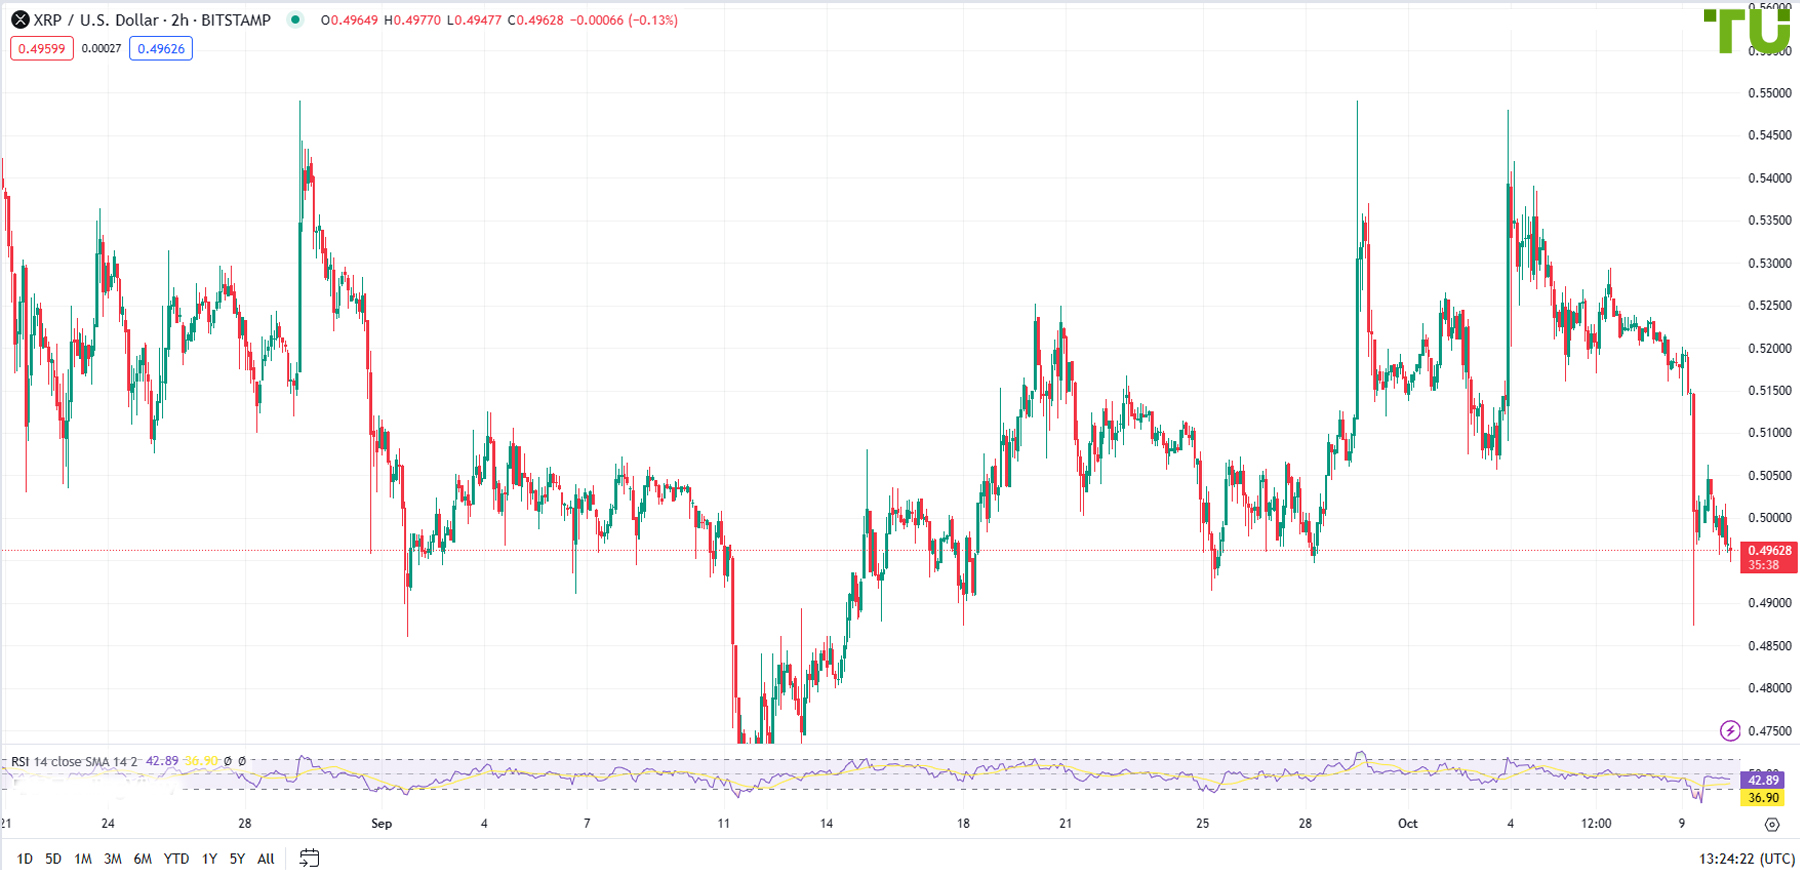 XRP/USD resumed its decline